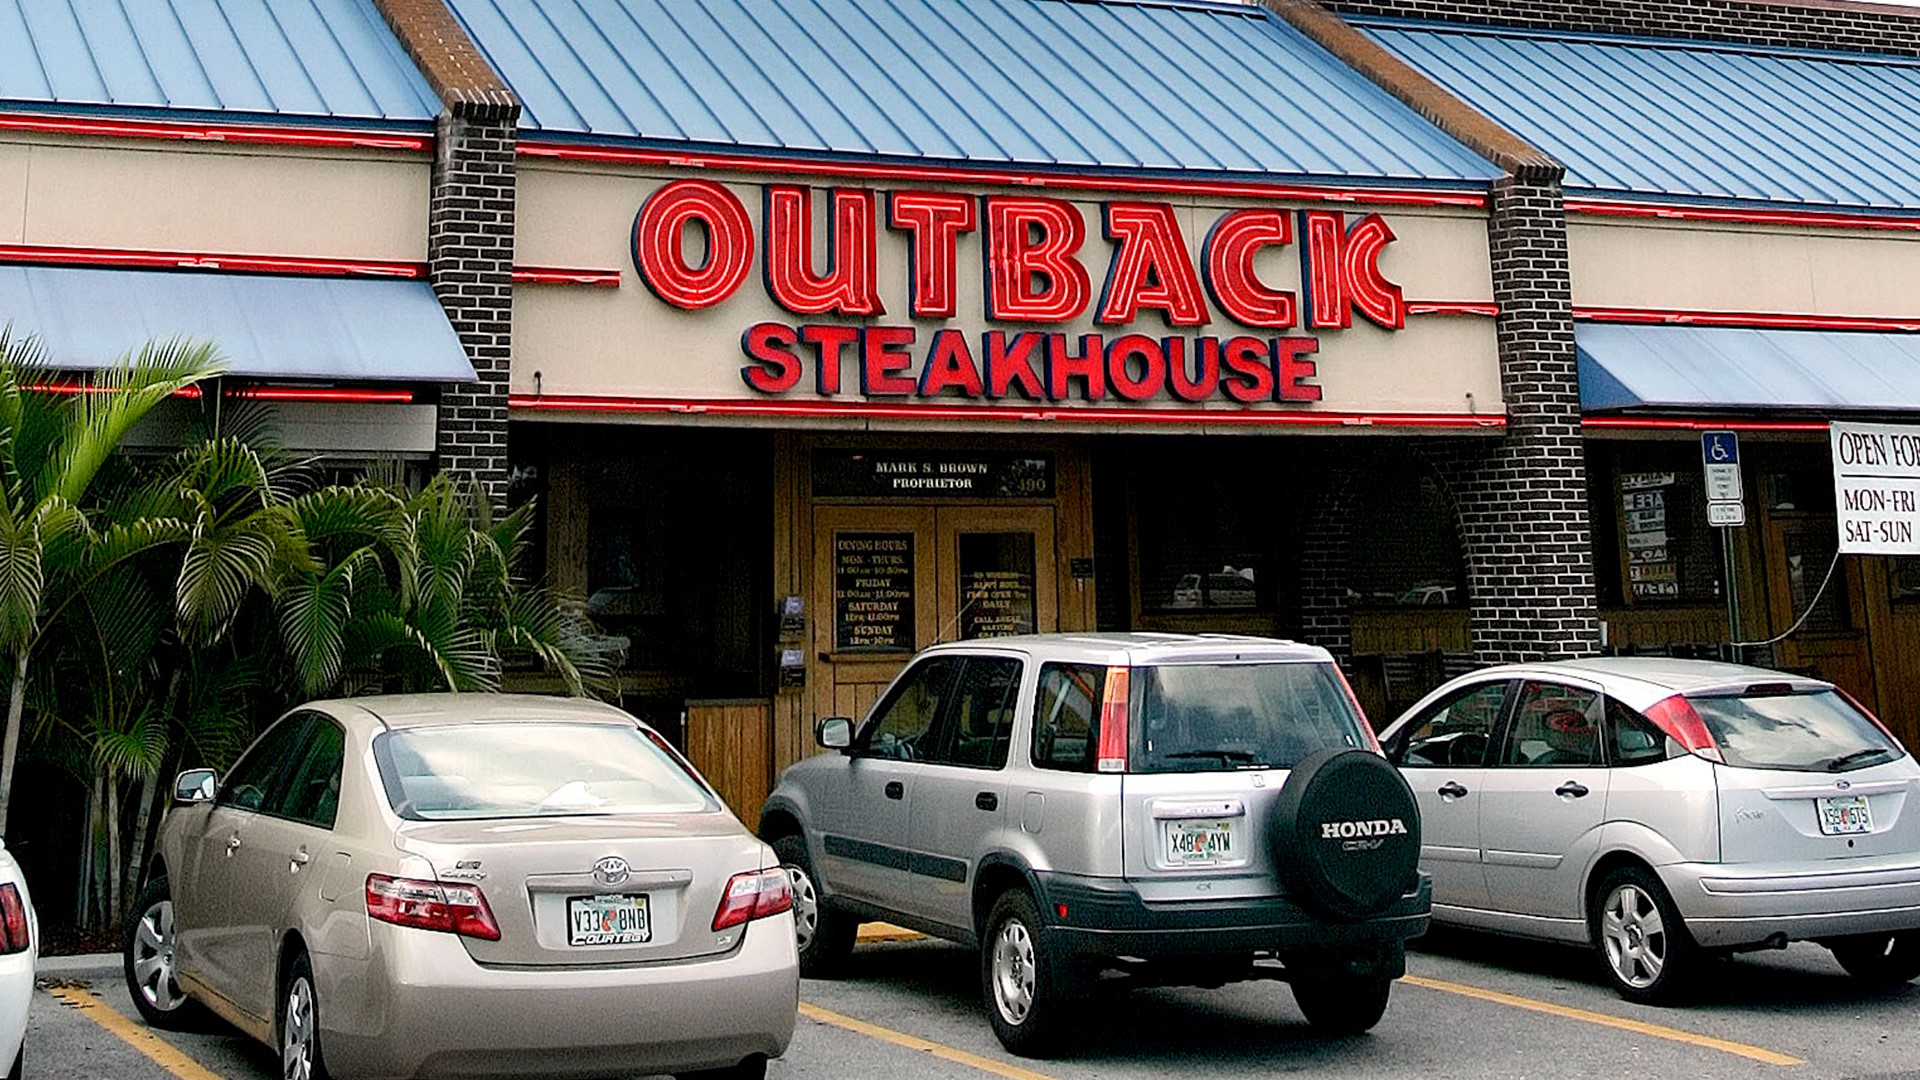 Outback Steakhouse closures Which locations are impacted?